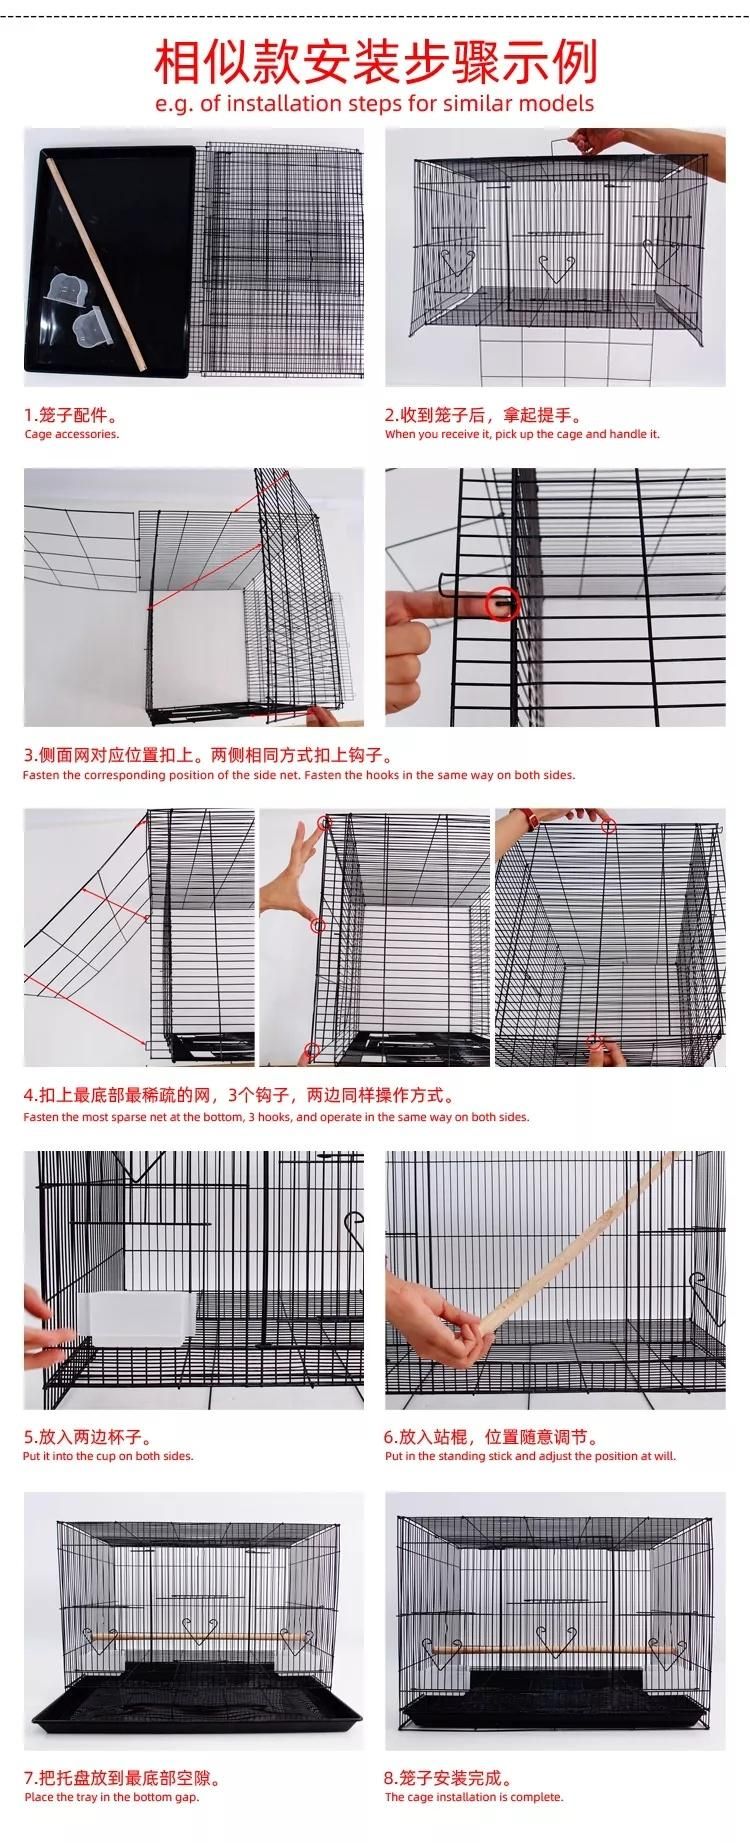 Pet Supplies Hot Sale Factory Good Quality 76cm Bigger Size Bird Breeding Cage with One Breeding Door